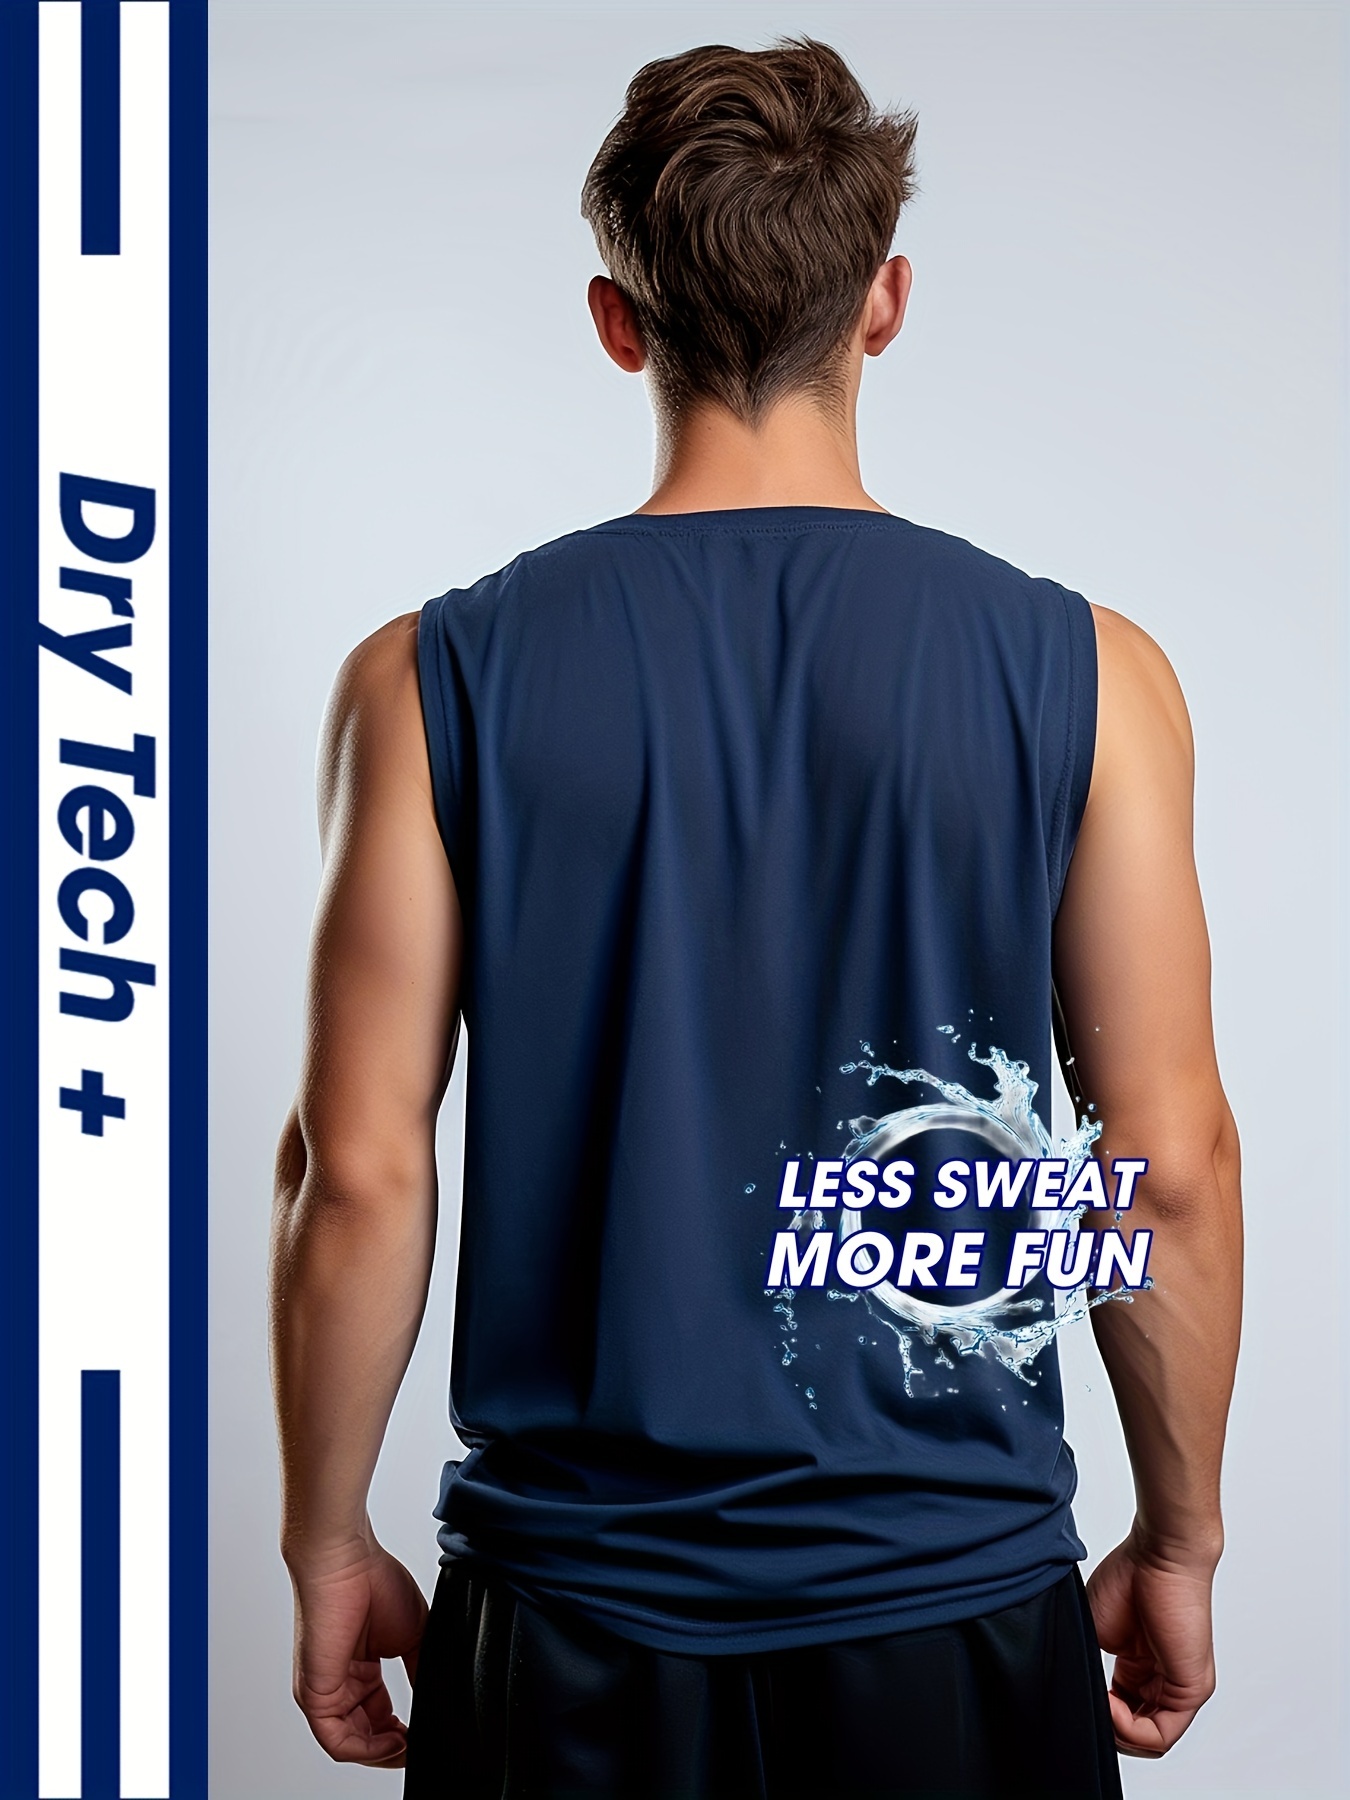 BASKETBALL JERSEY QUICK DRY DRI-fit